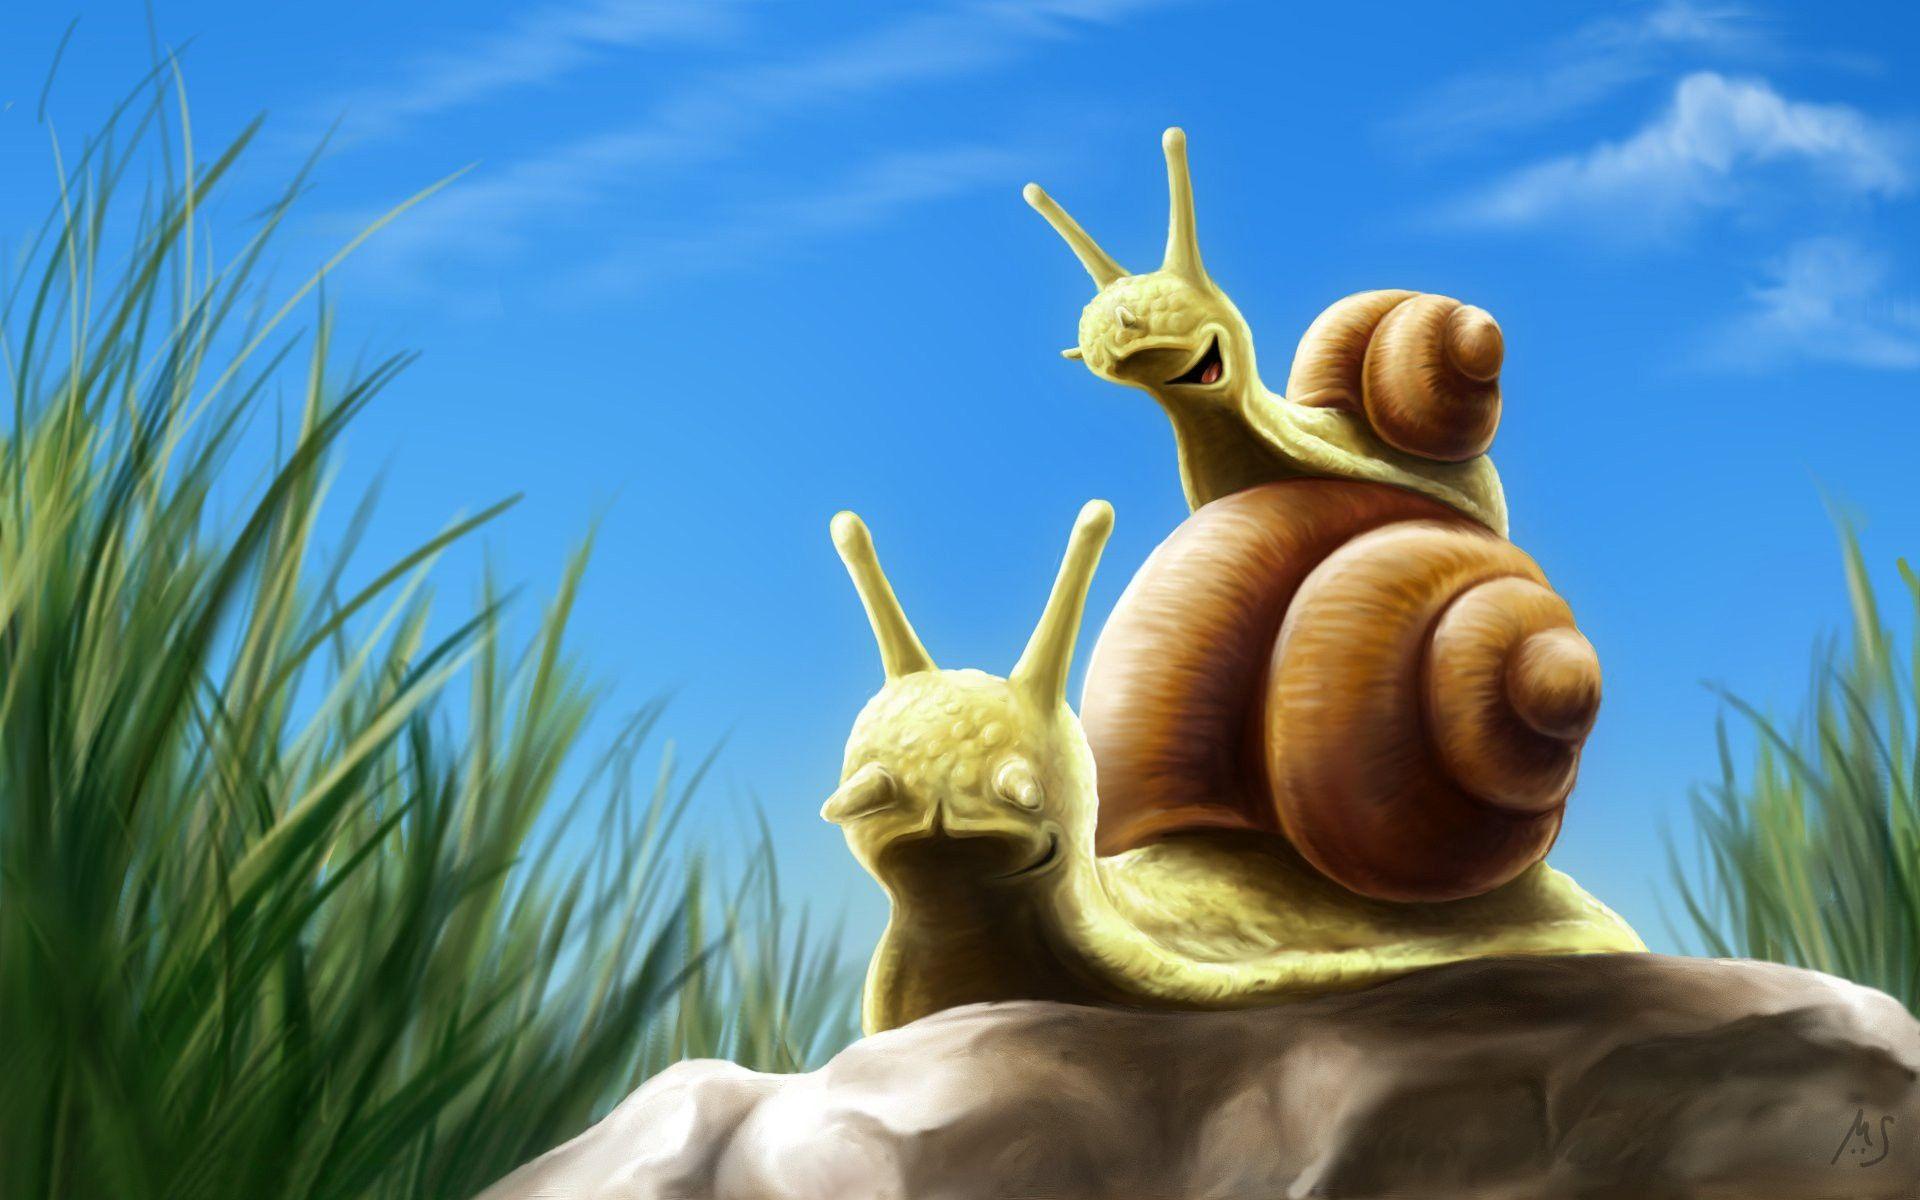 Snails artwork wallpapers High Quality Wallpapers,High